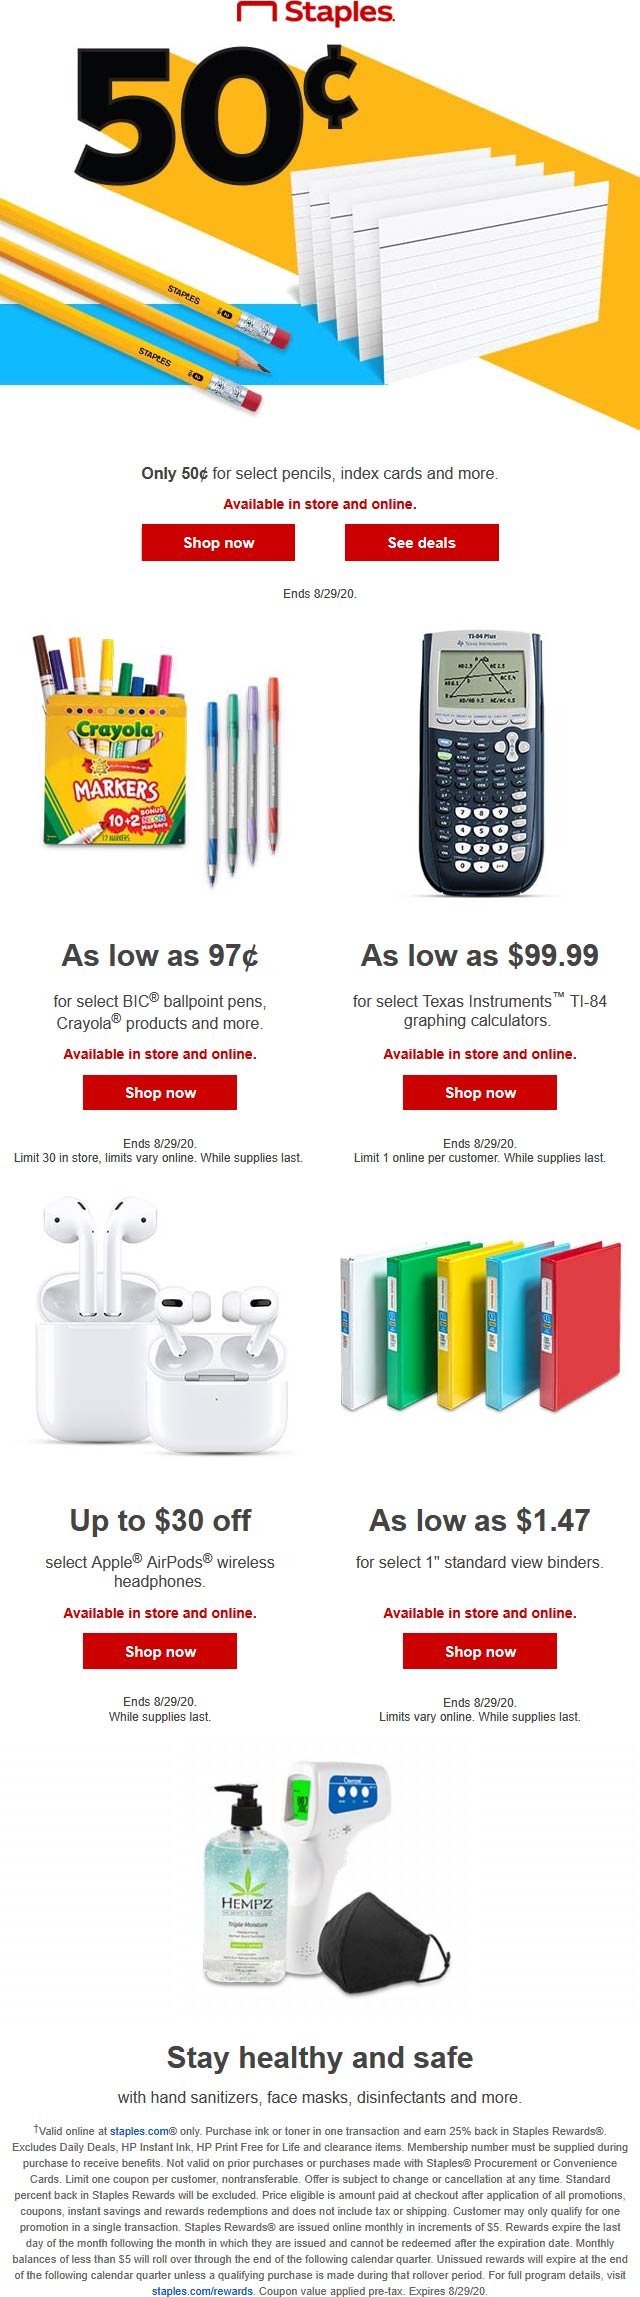 Staples stores Coupon  Various .50 cent school supplies at Staples, ditto online #staples 